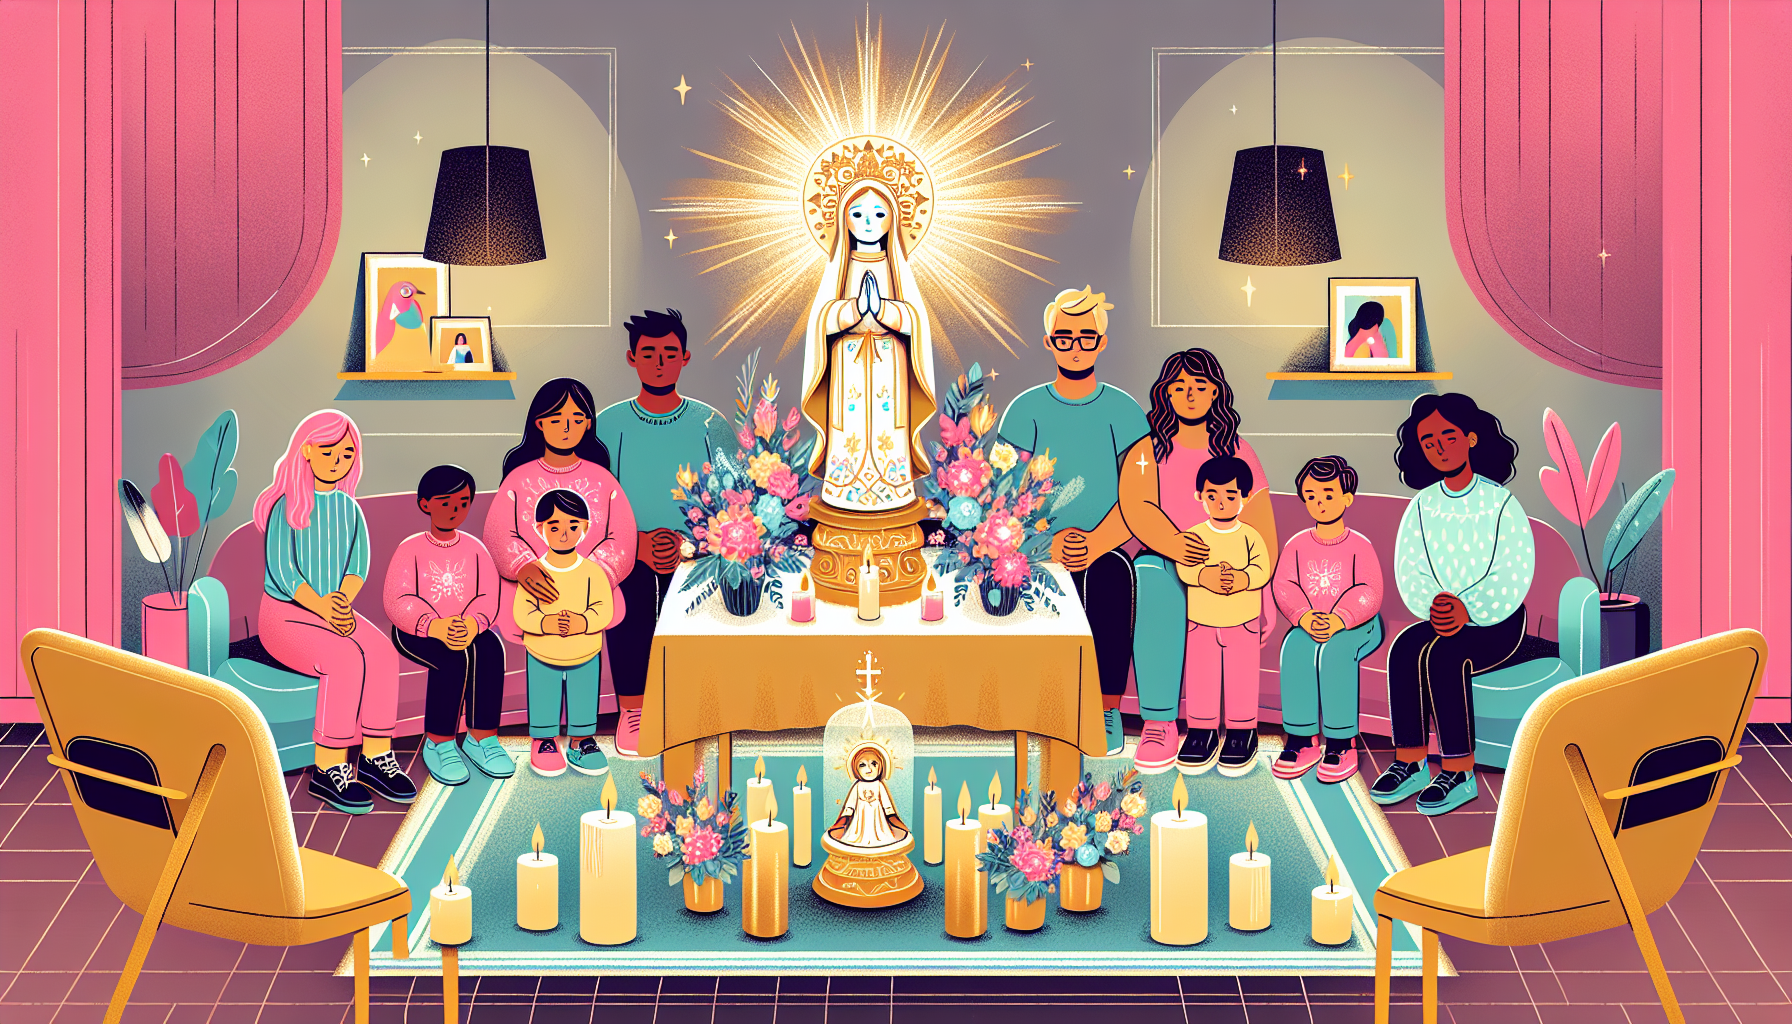 An illustration of a family gathered around a small altar, praying together with a statue of the Divino Niño Jesús placed at the center, decorated with flowers and candles, in a cozy, warmly lit livin